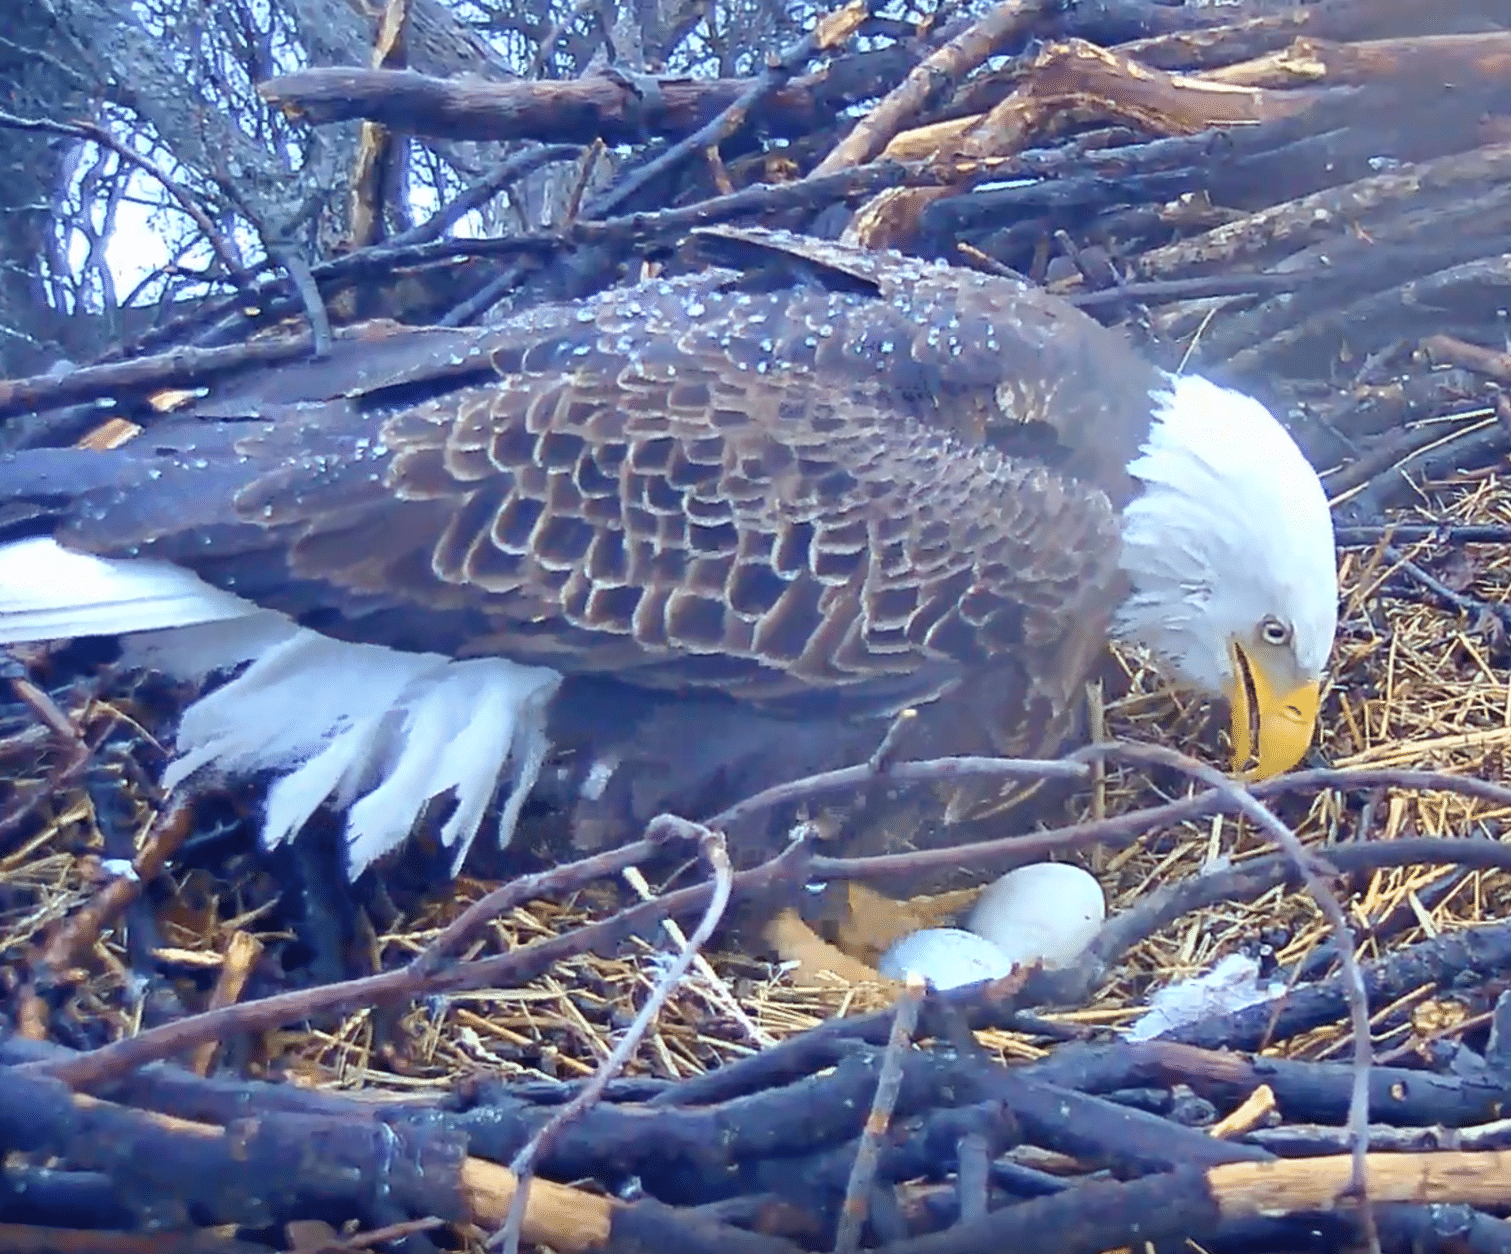 Photo shows an eagle with eggs